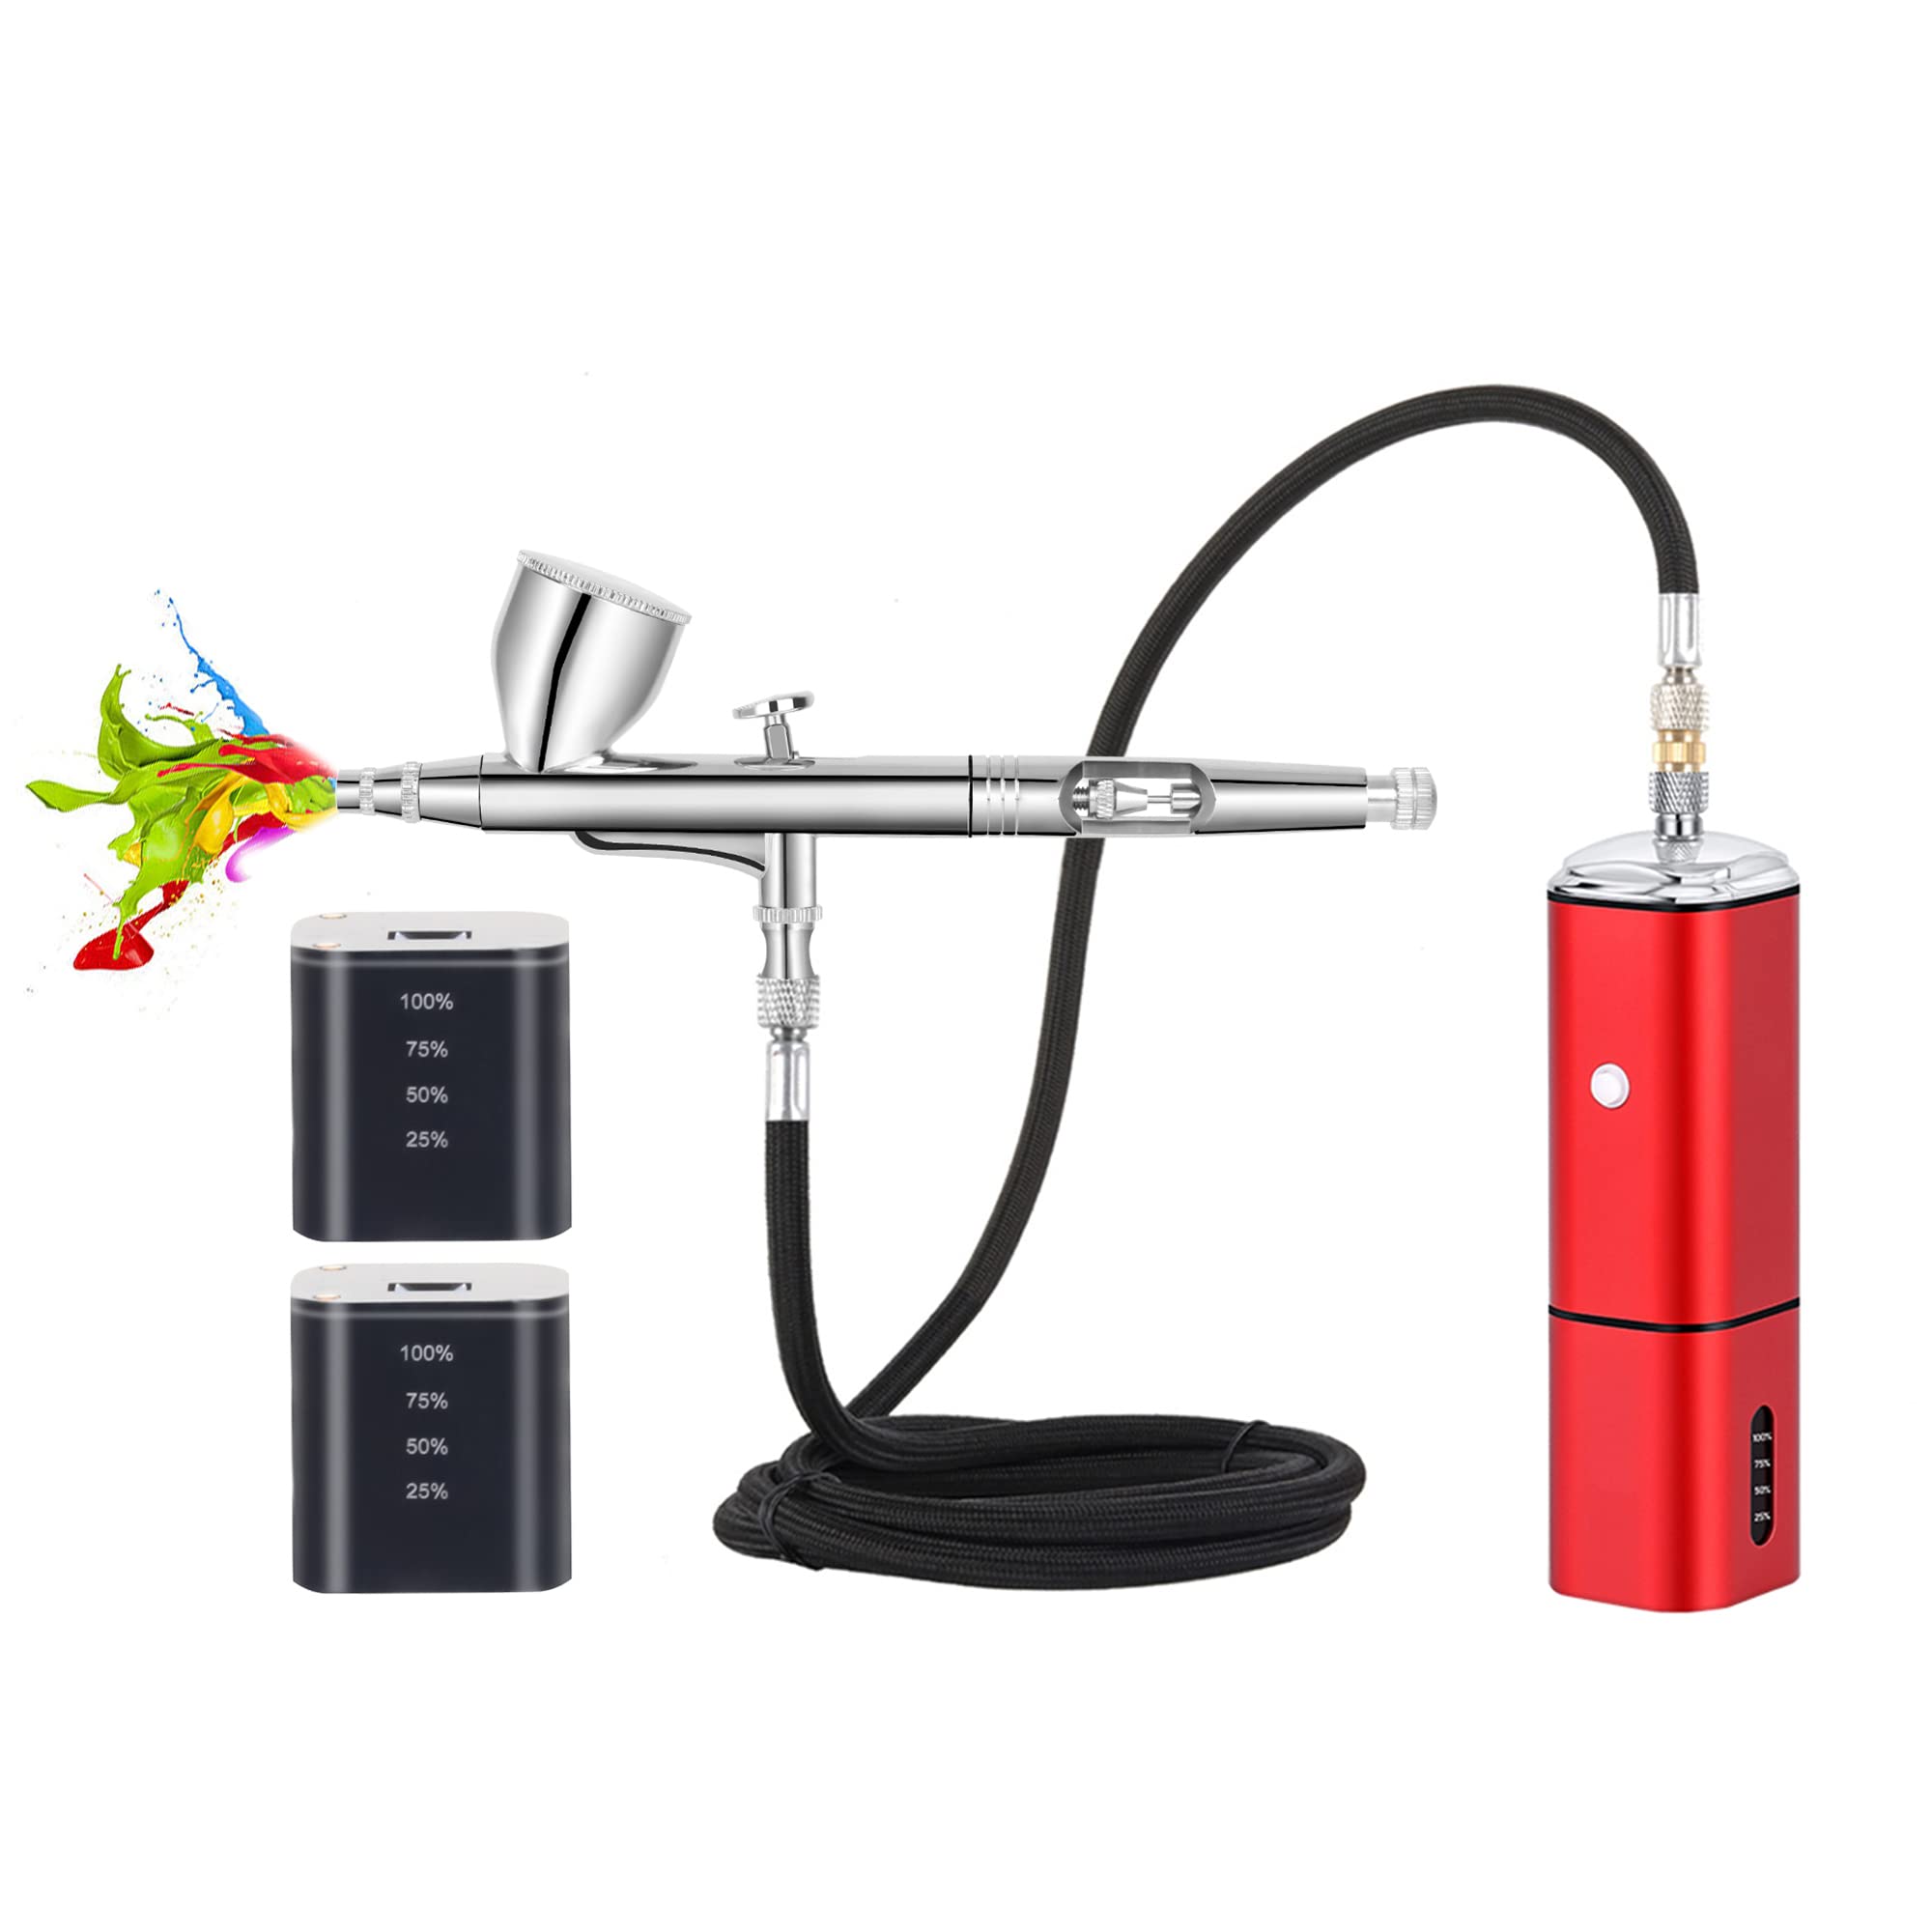 Casubaris Airbrush kit with compressor portable cordless airbrush kit  rechargeable auto stop dual action air brush pen match different airbrush  guns for barbers model painting nail art craft makeup Red